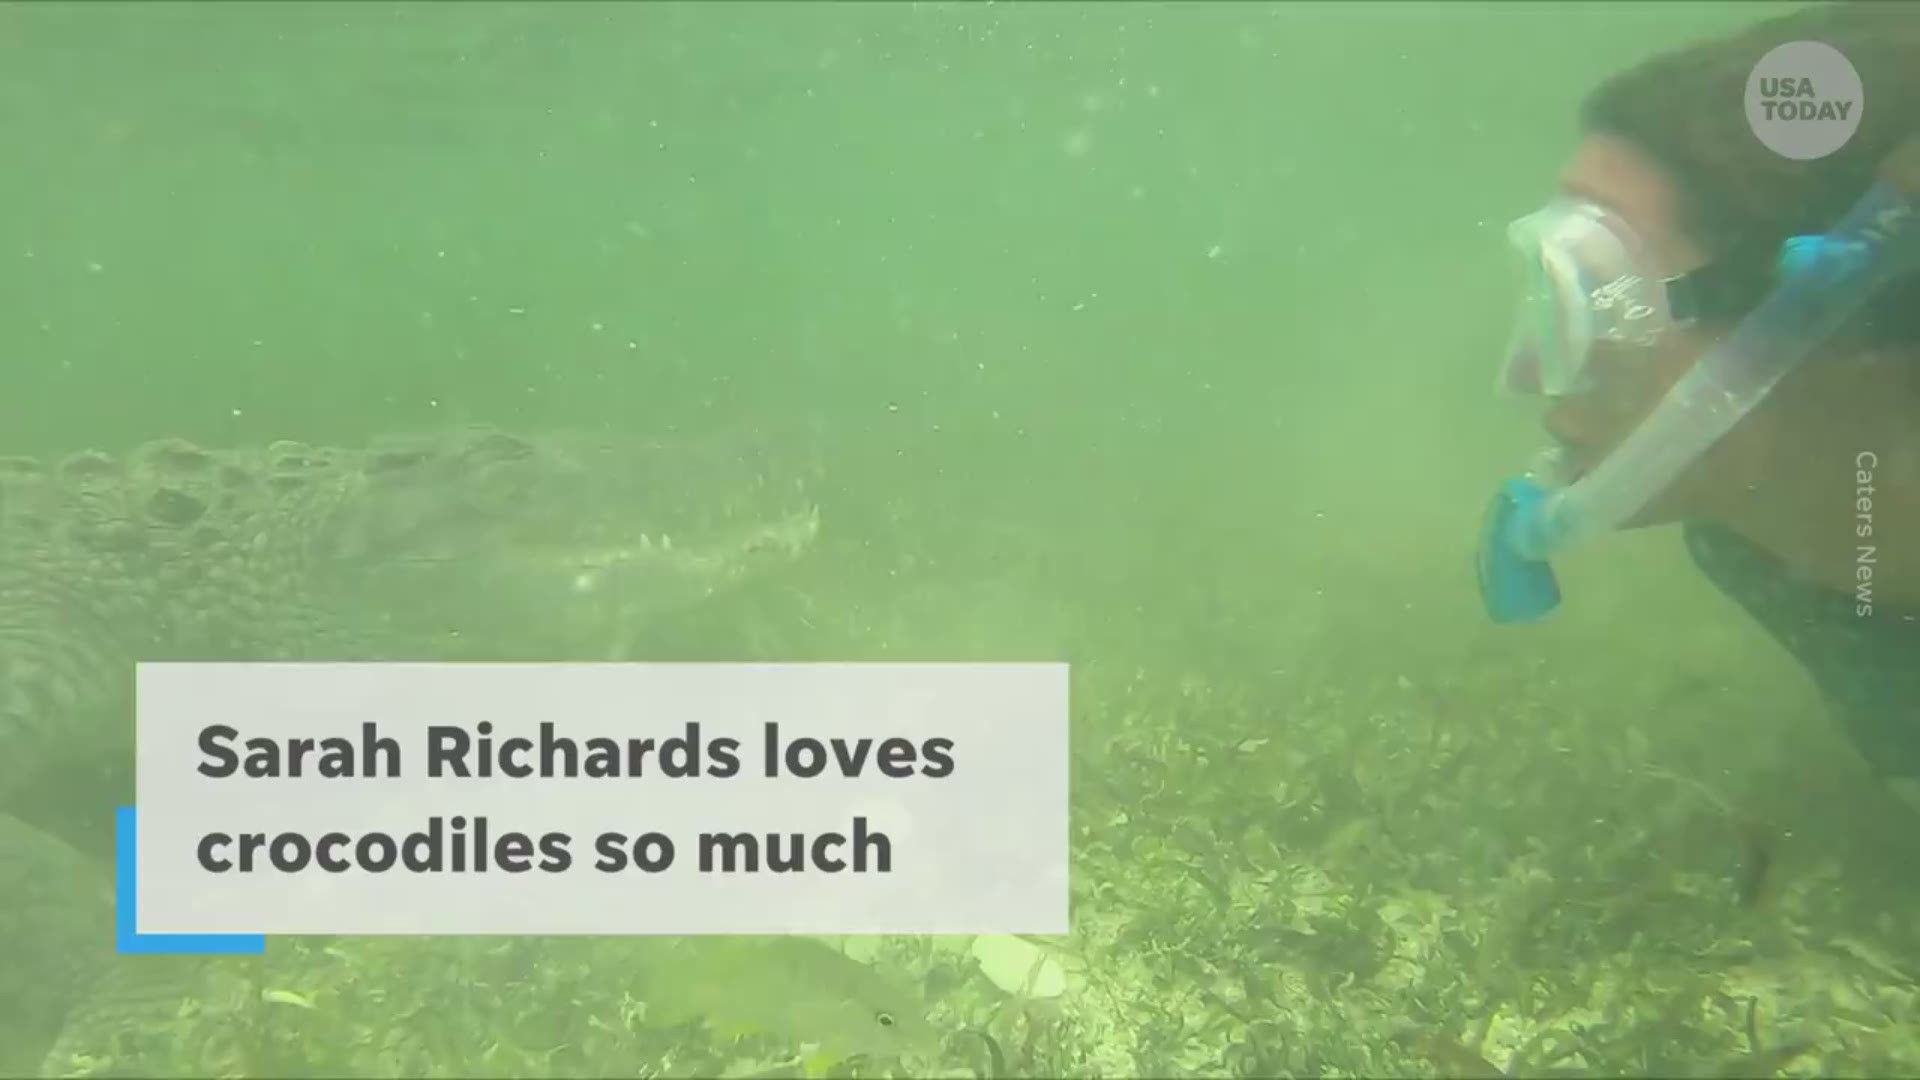 British-born Sarah Richards came face-to-face with a crocodile during a scuba trip to Mexico in July.